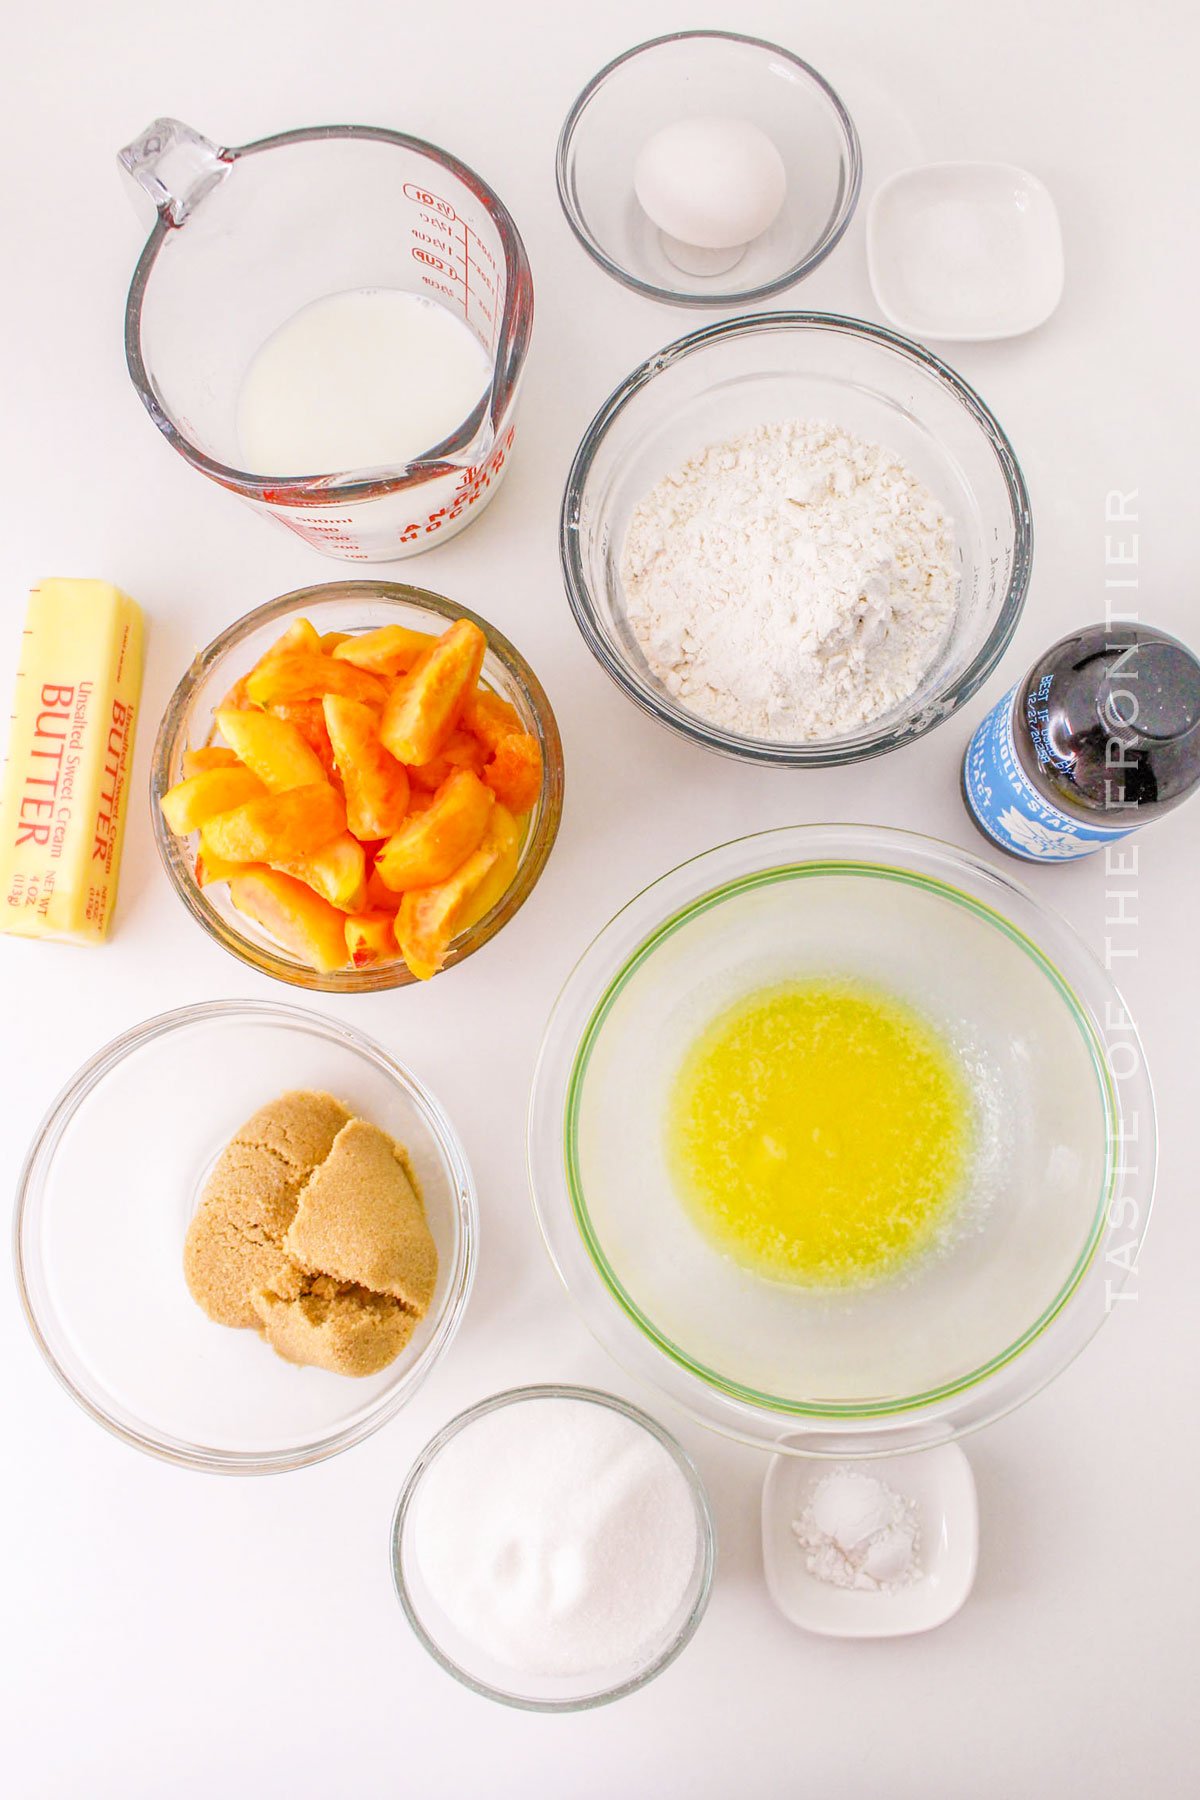 Old Fashioned Peach Cake ingredients